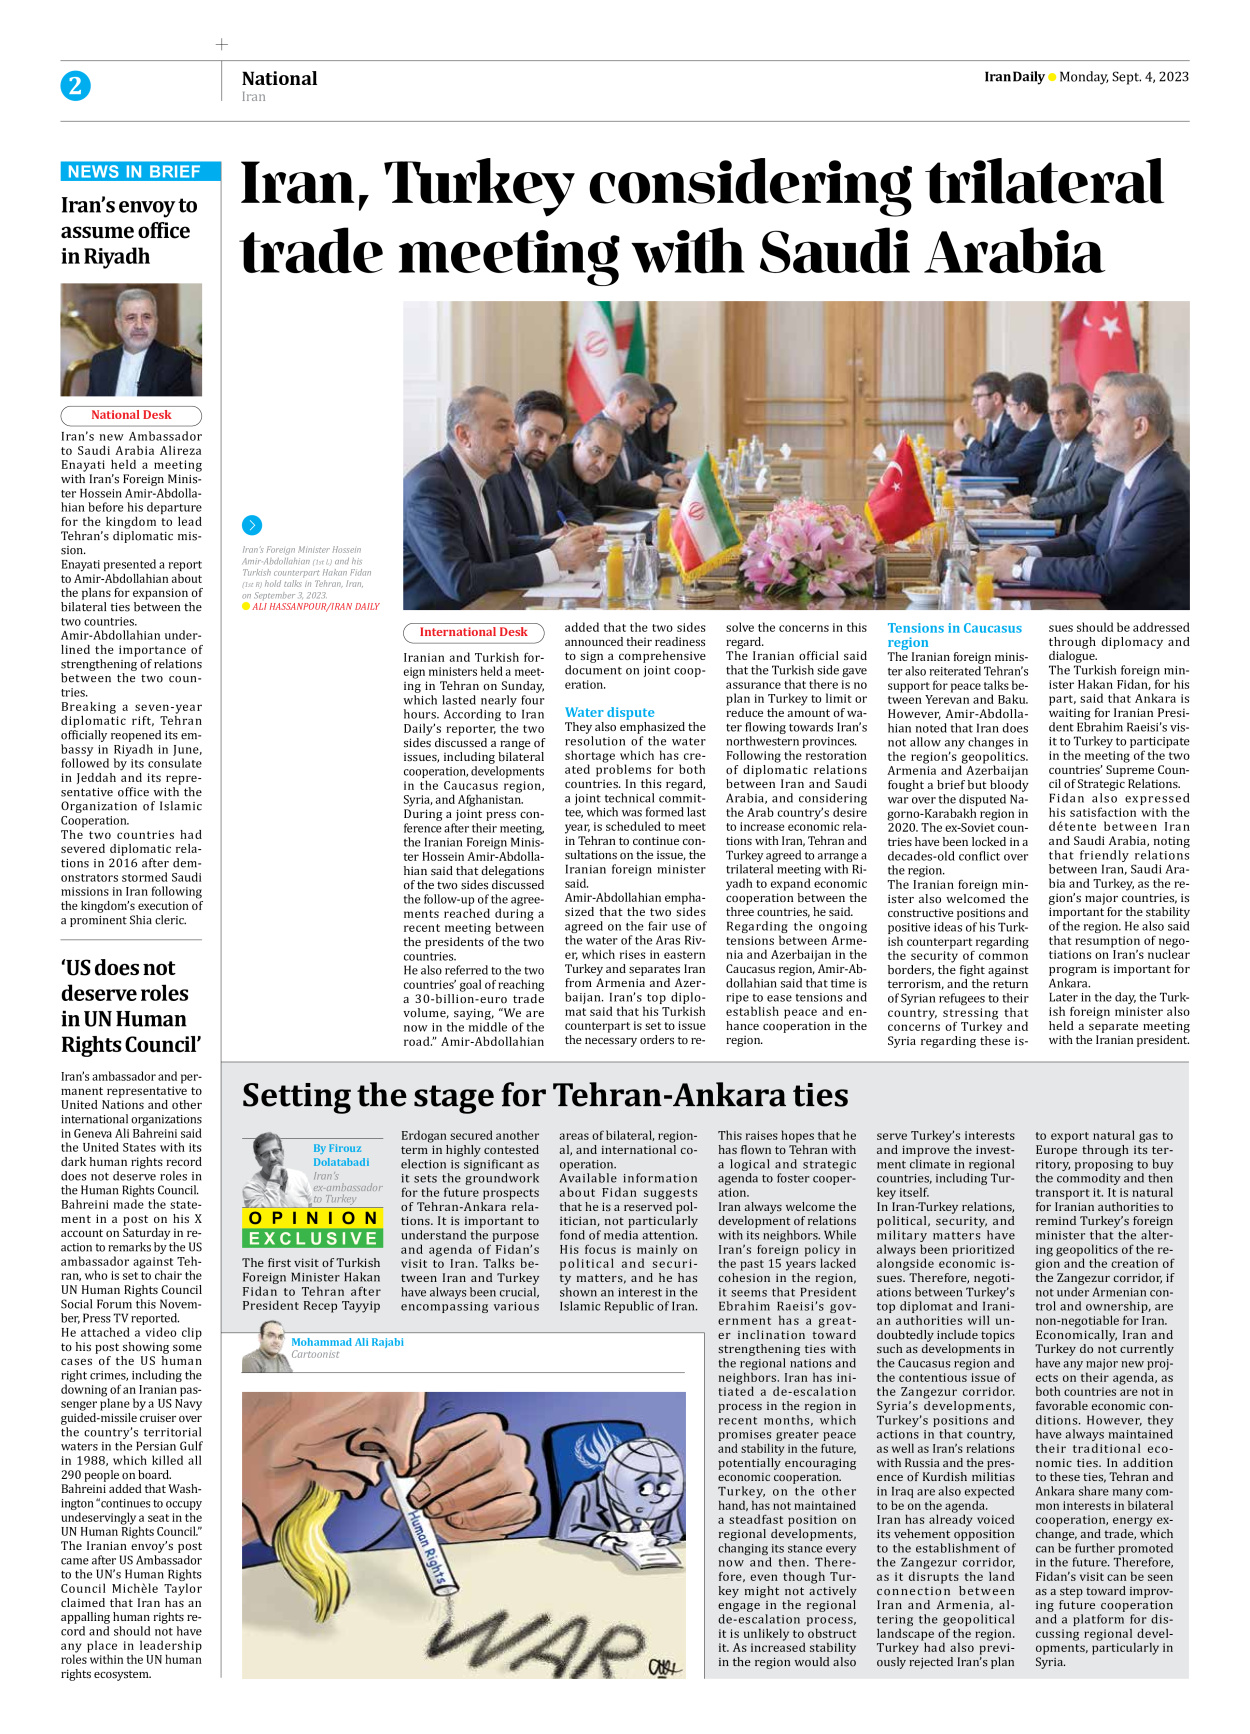 Iran Daily - Number Seven Thousand Three Hundred and Eighty - 04 September 2023 - Page 2